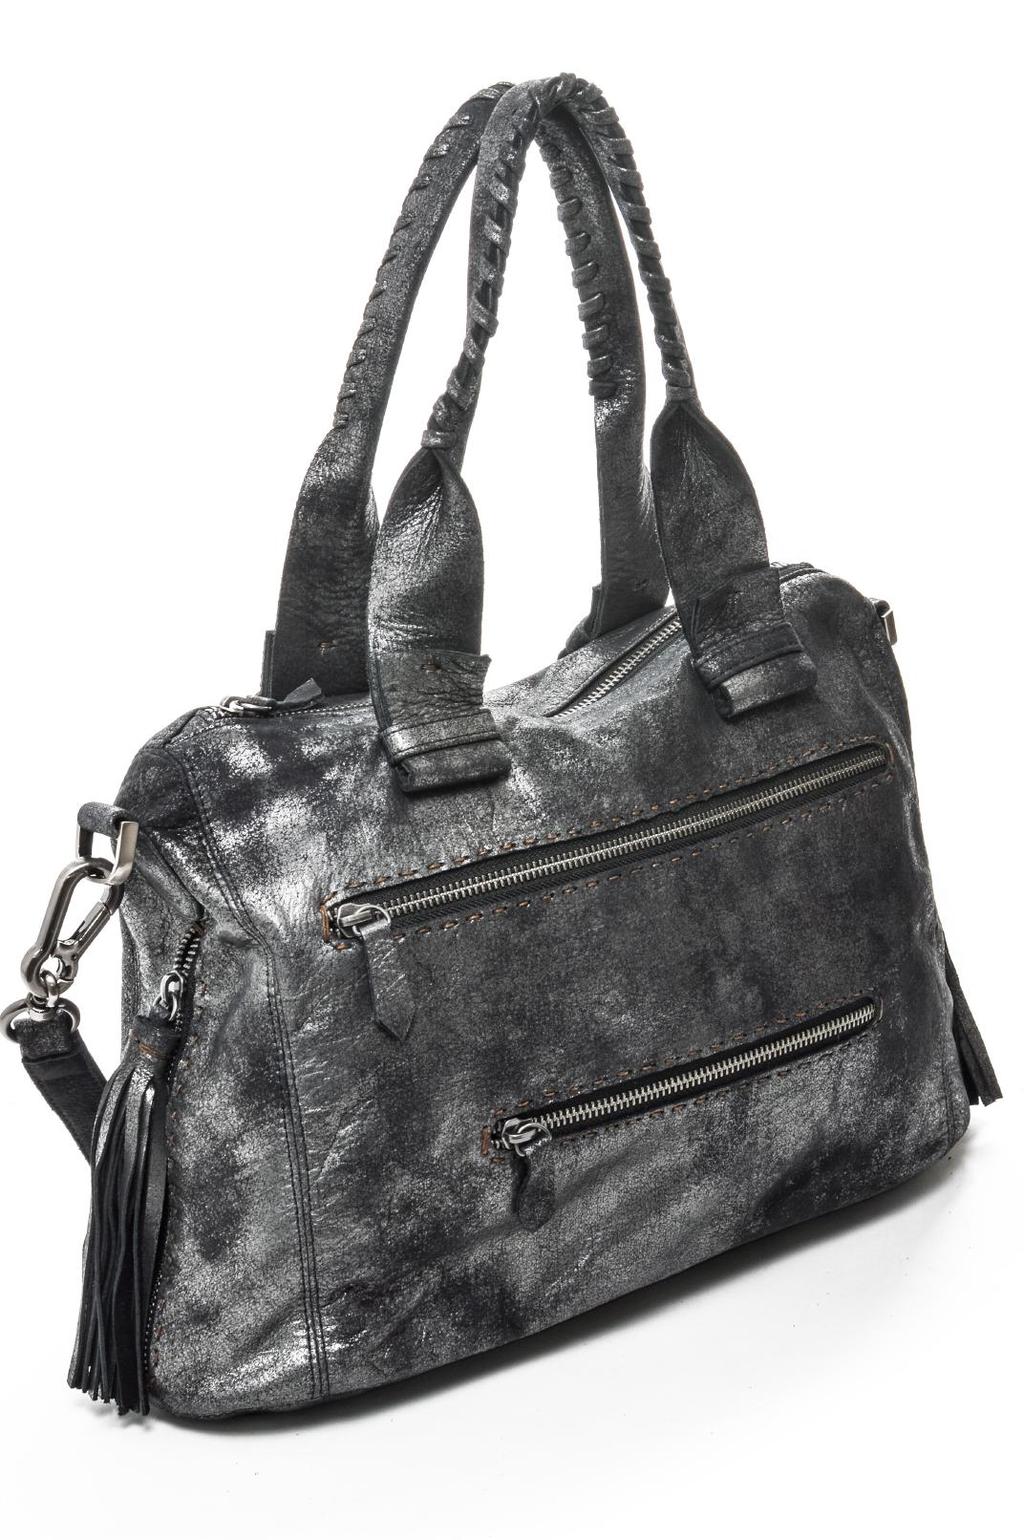 JOEL Whip-stitched Top Zip Shoulder Bag With Side Zippers